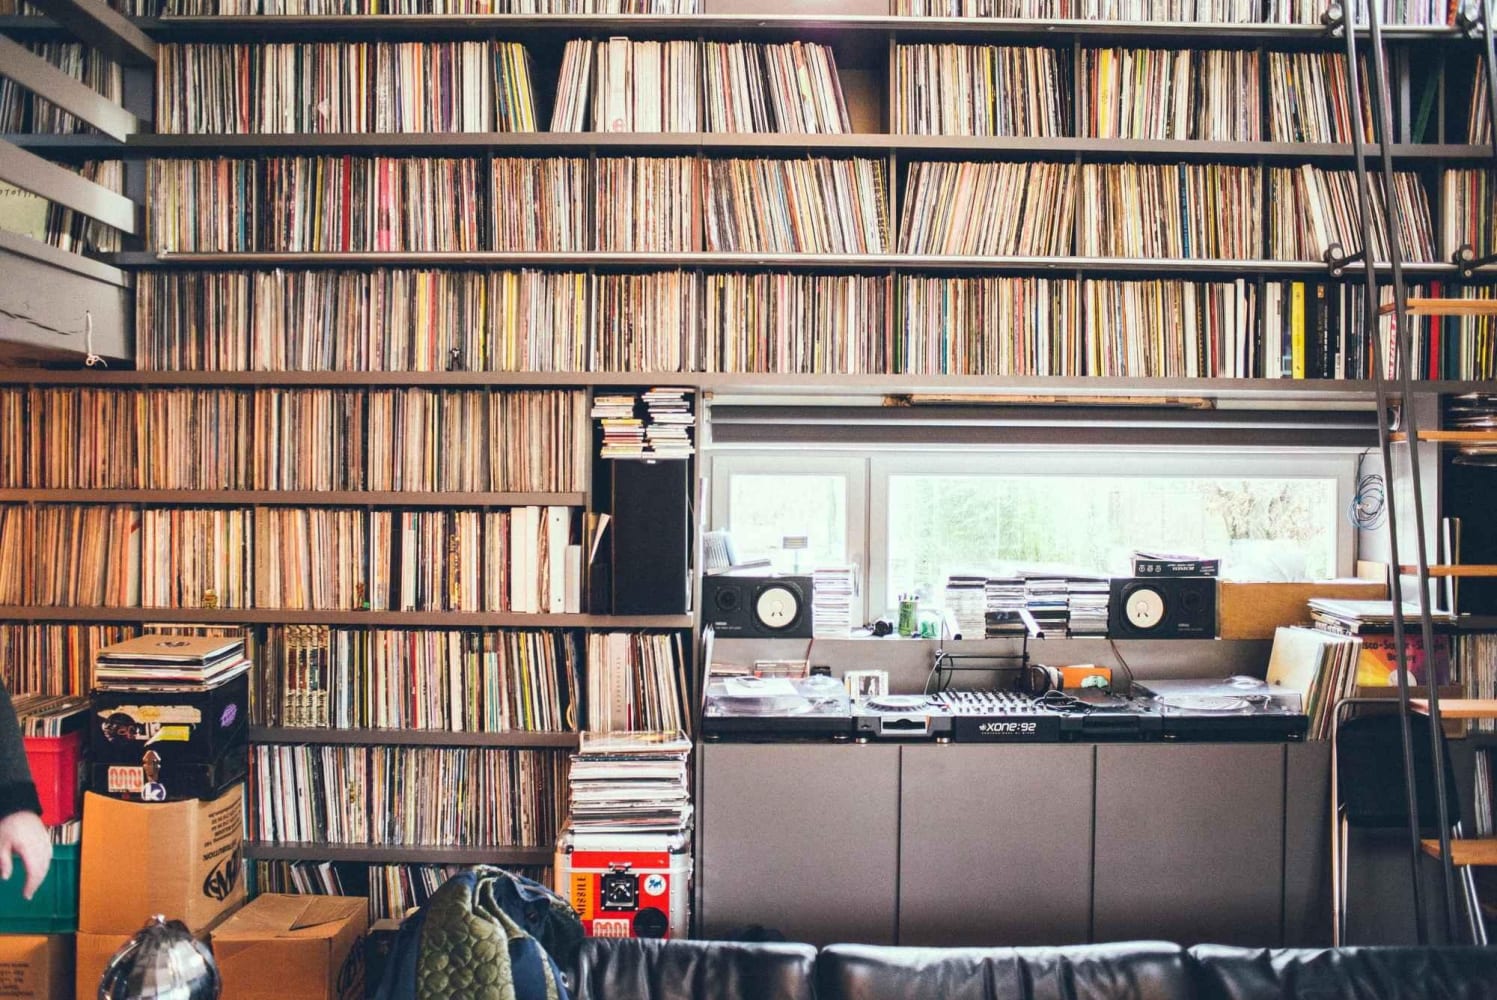 An introduction to Discogs